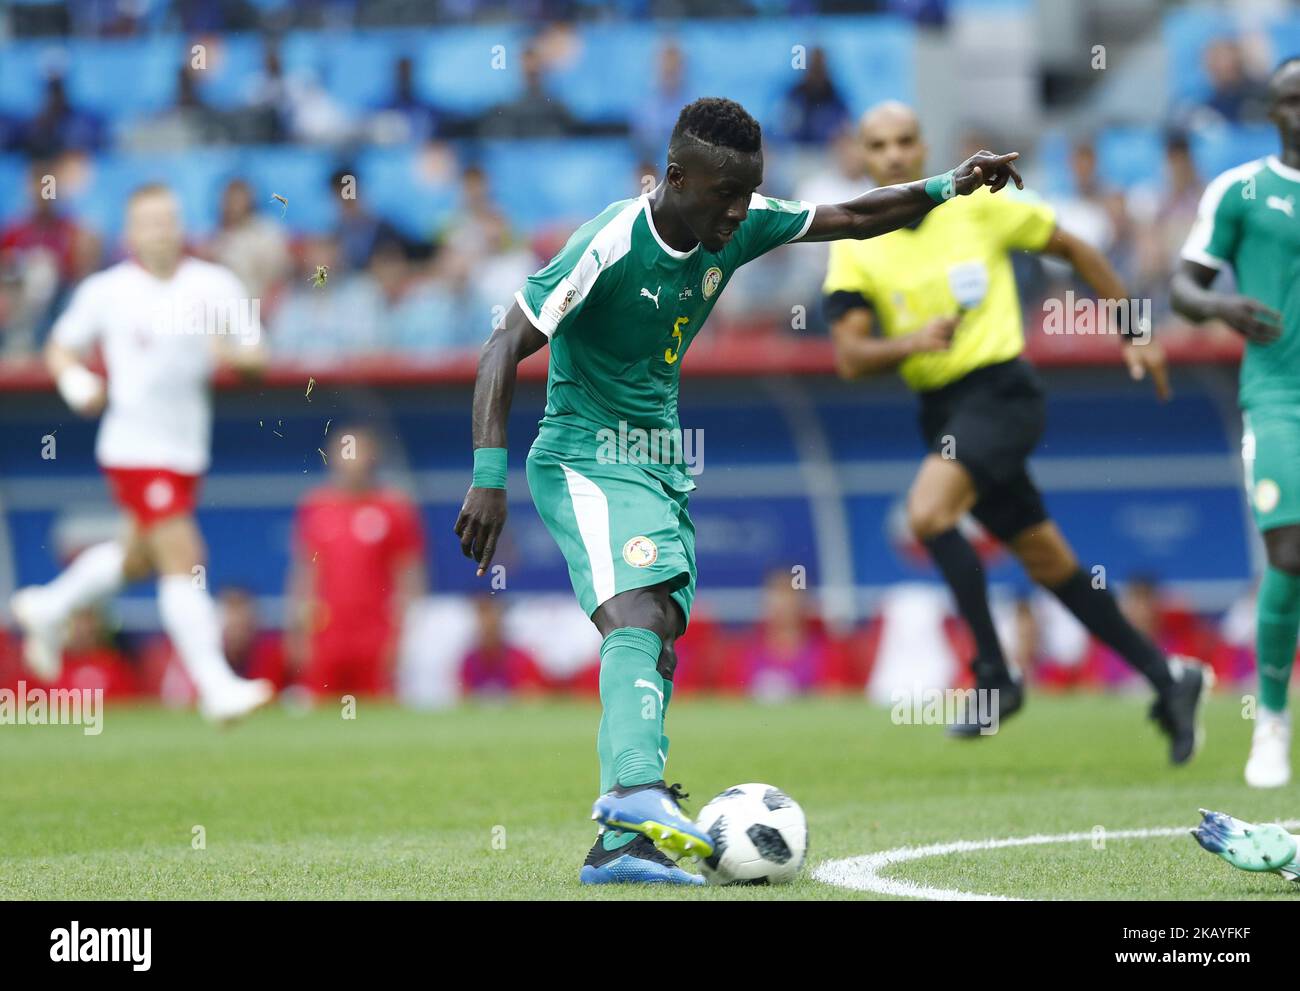 Group H Poland v Senegal - FIFA World Cup Russia 2018 Idrissa Gana Gueye (Senegal) scores the goal of 1-0 at Spartak Stadium in Moscow, Russia on June 19, 2018. (Photo by Matteo Ciambelli/NurPhoto) Stock Photo